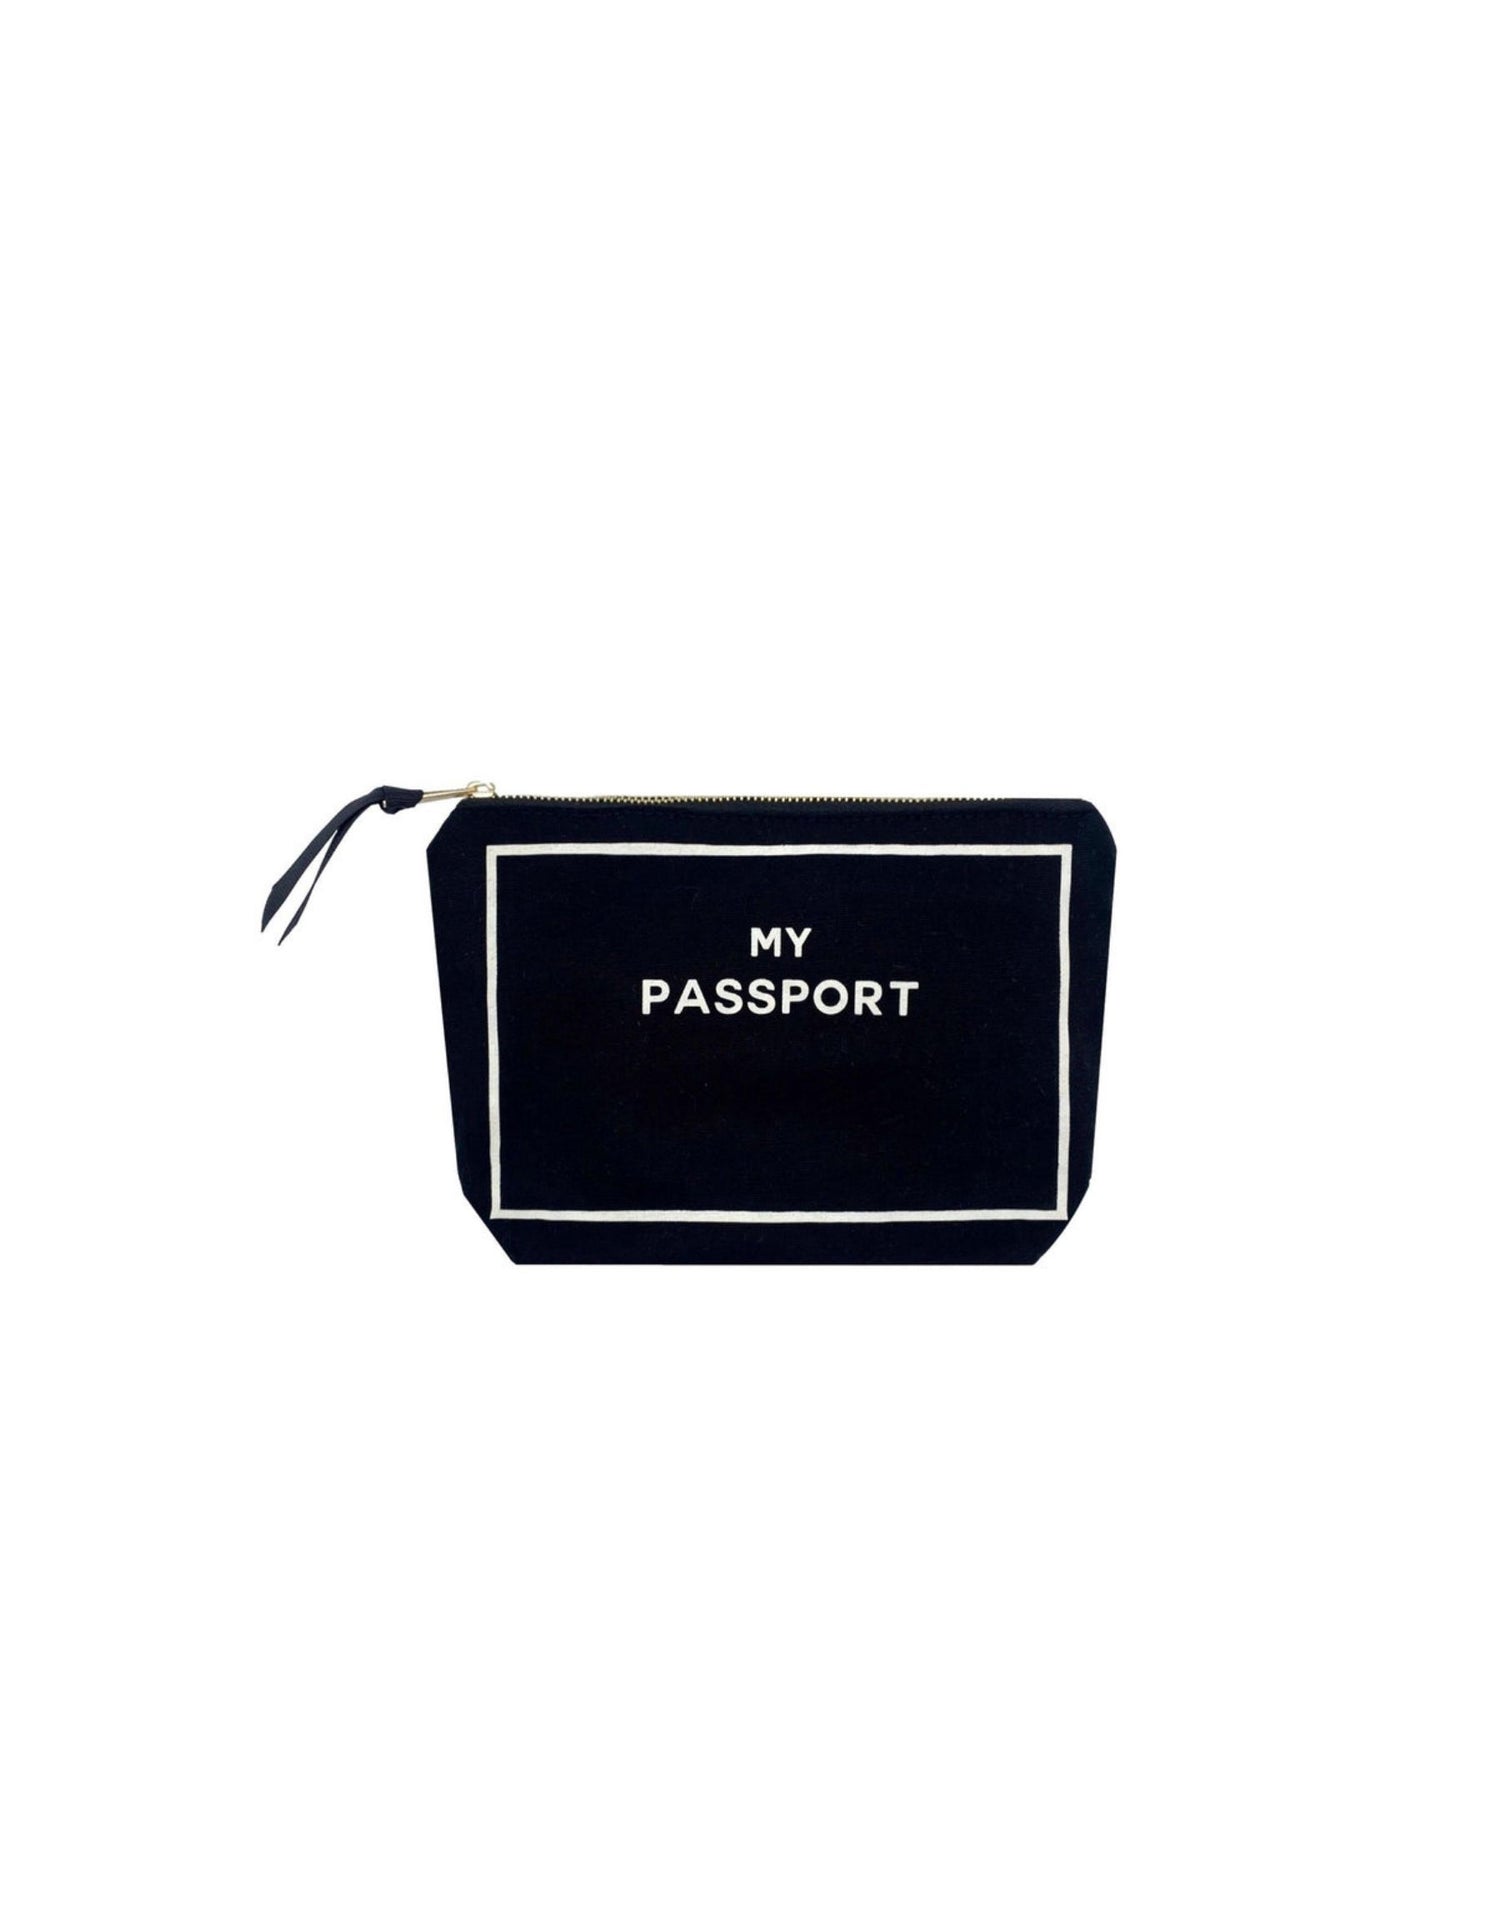 My Passport Case in Black by Bag-all - Alternate Product View